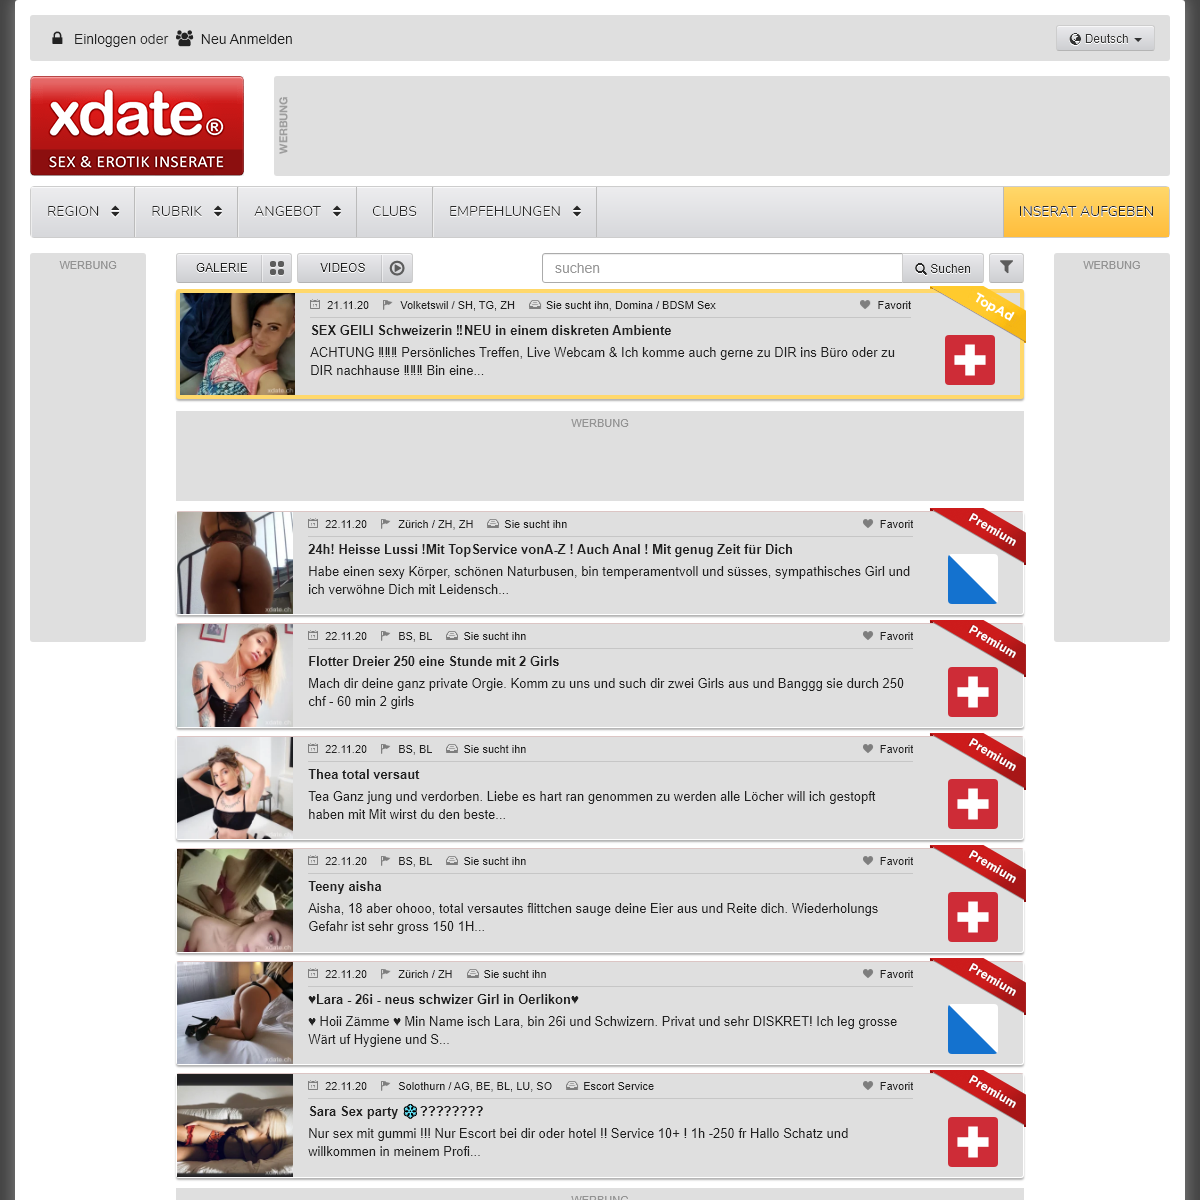 A complete backup of www.xdate.ch